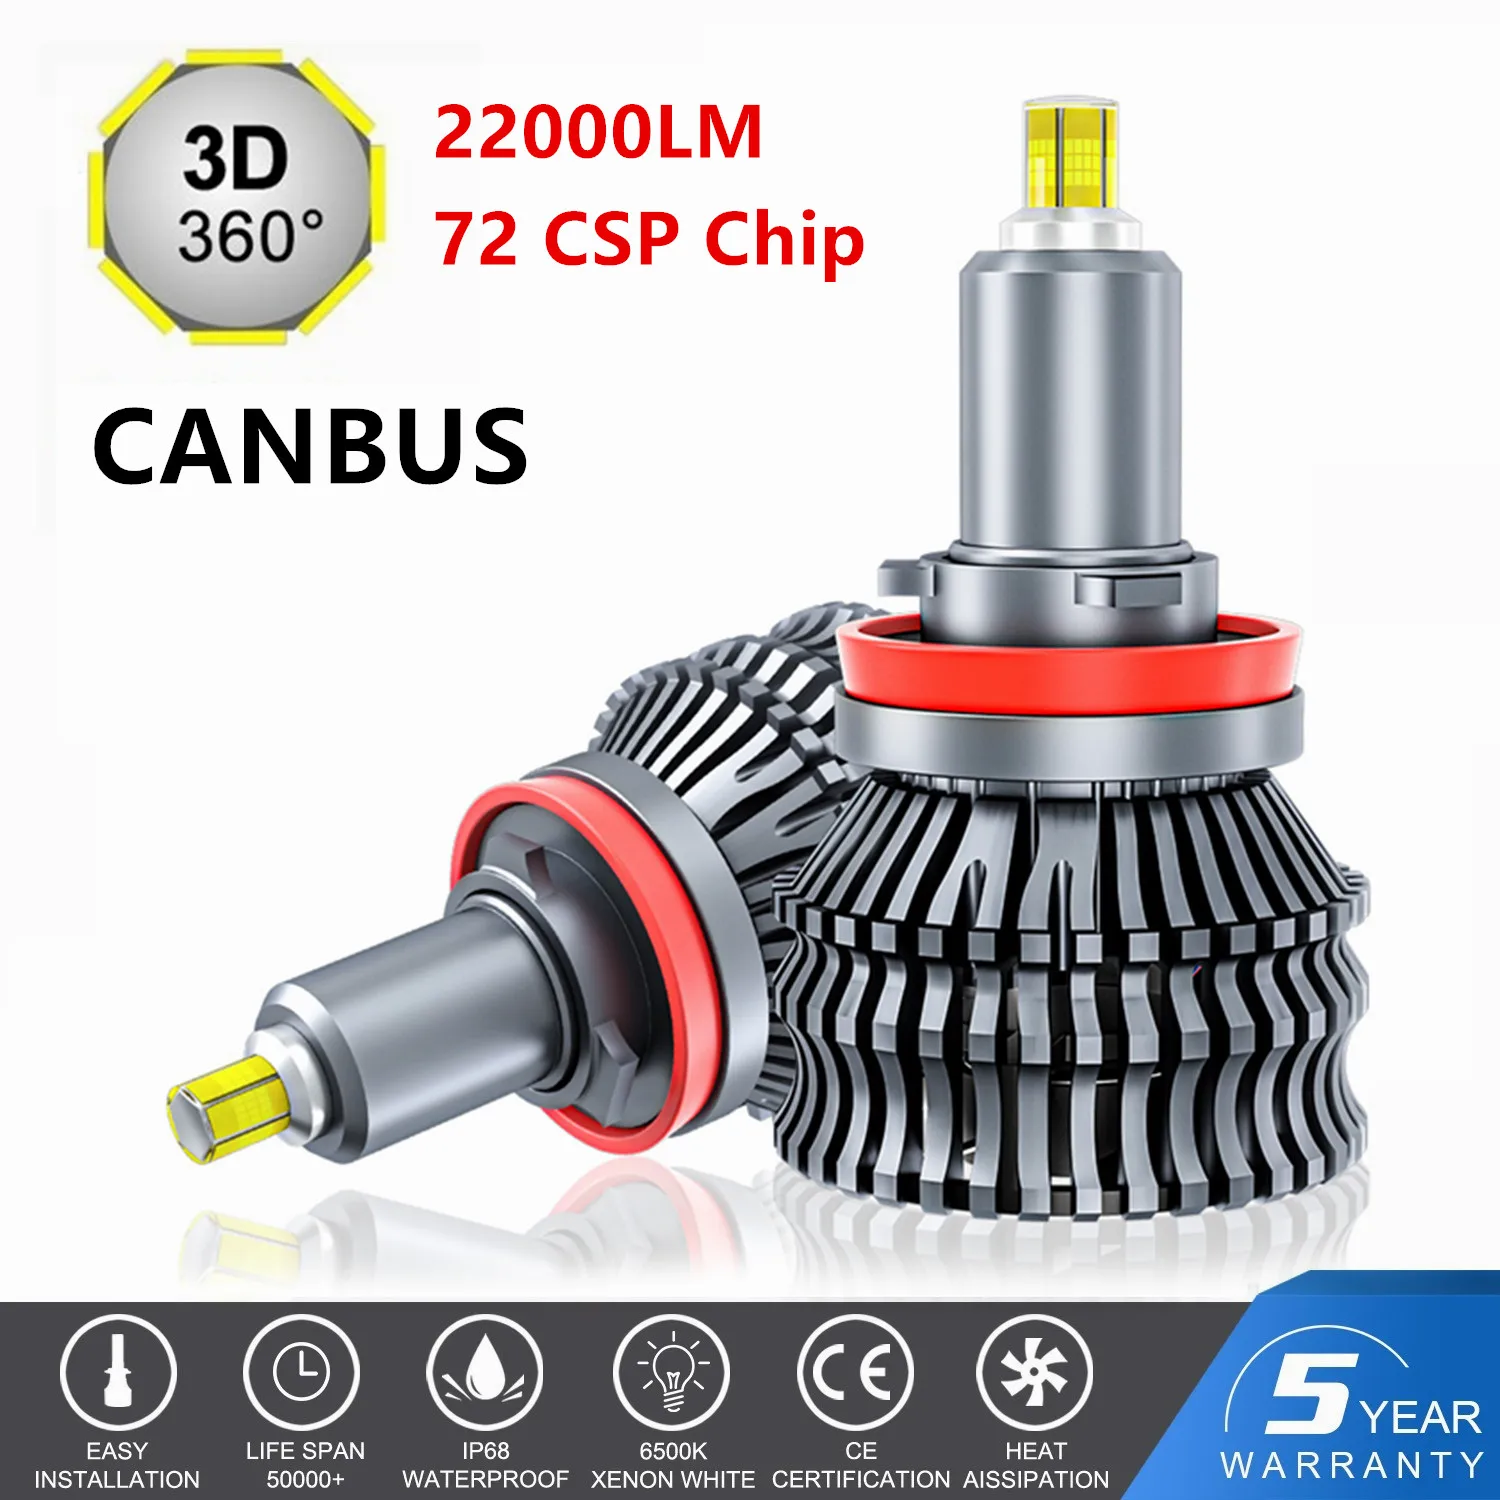 

H1 LED H7 LED 22000LM H8 H9 HB3 9005 HB4 9006 H11 Led Headlights Bulbs 6-sides 110W 3D high power Canbus 360 degree Auto Lamp